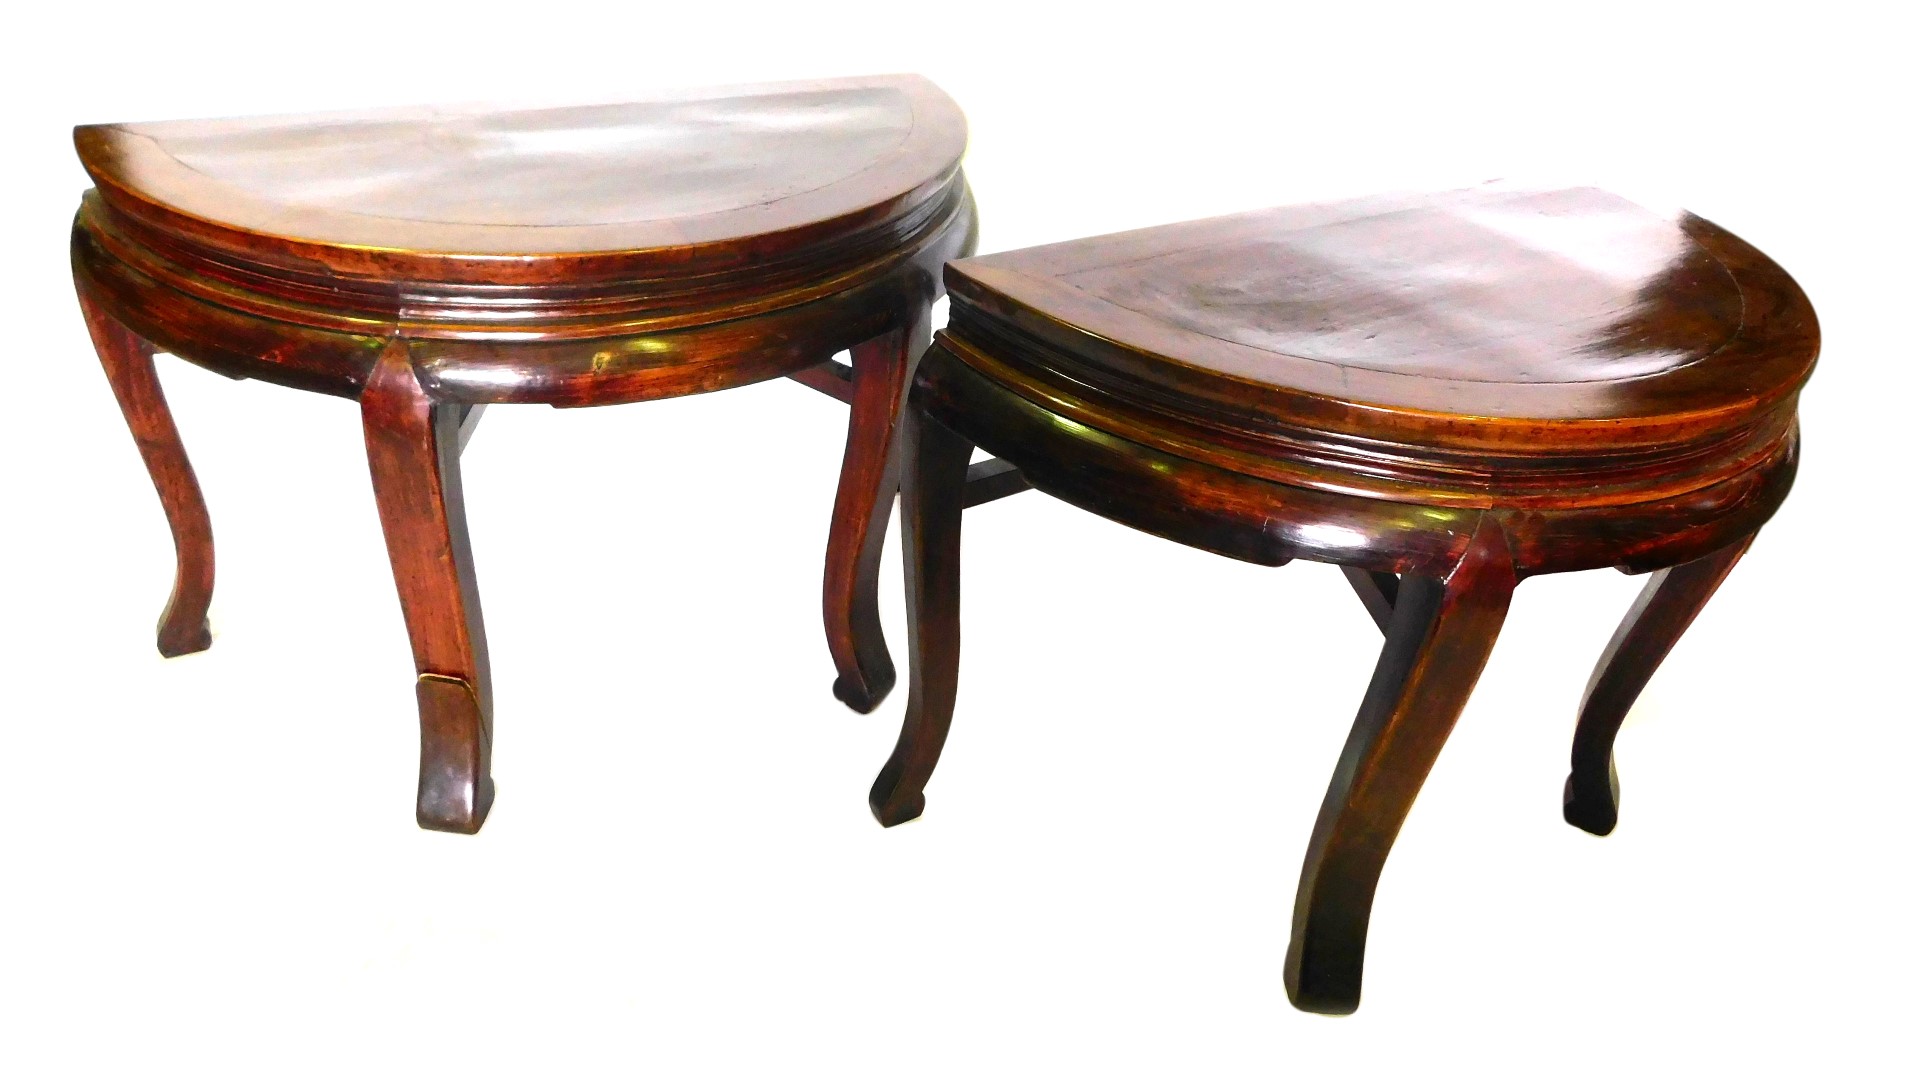 A pair of Chinese hardwood and softwood demi lune shaped console table, each with a plain frieze, on